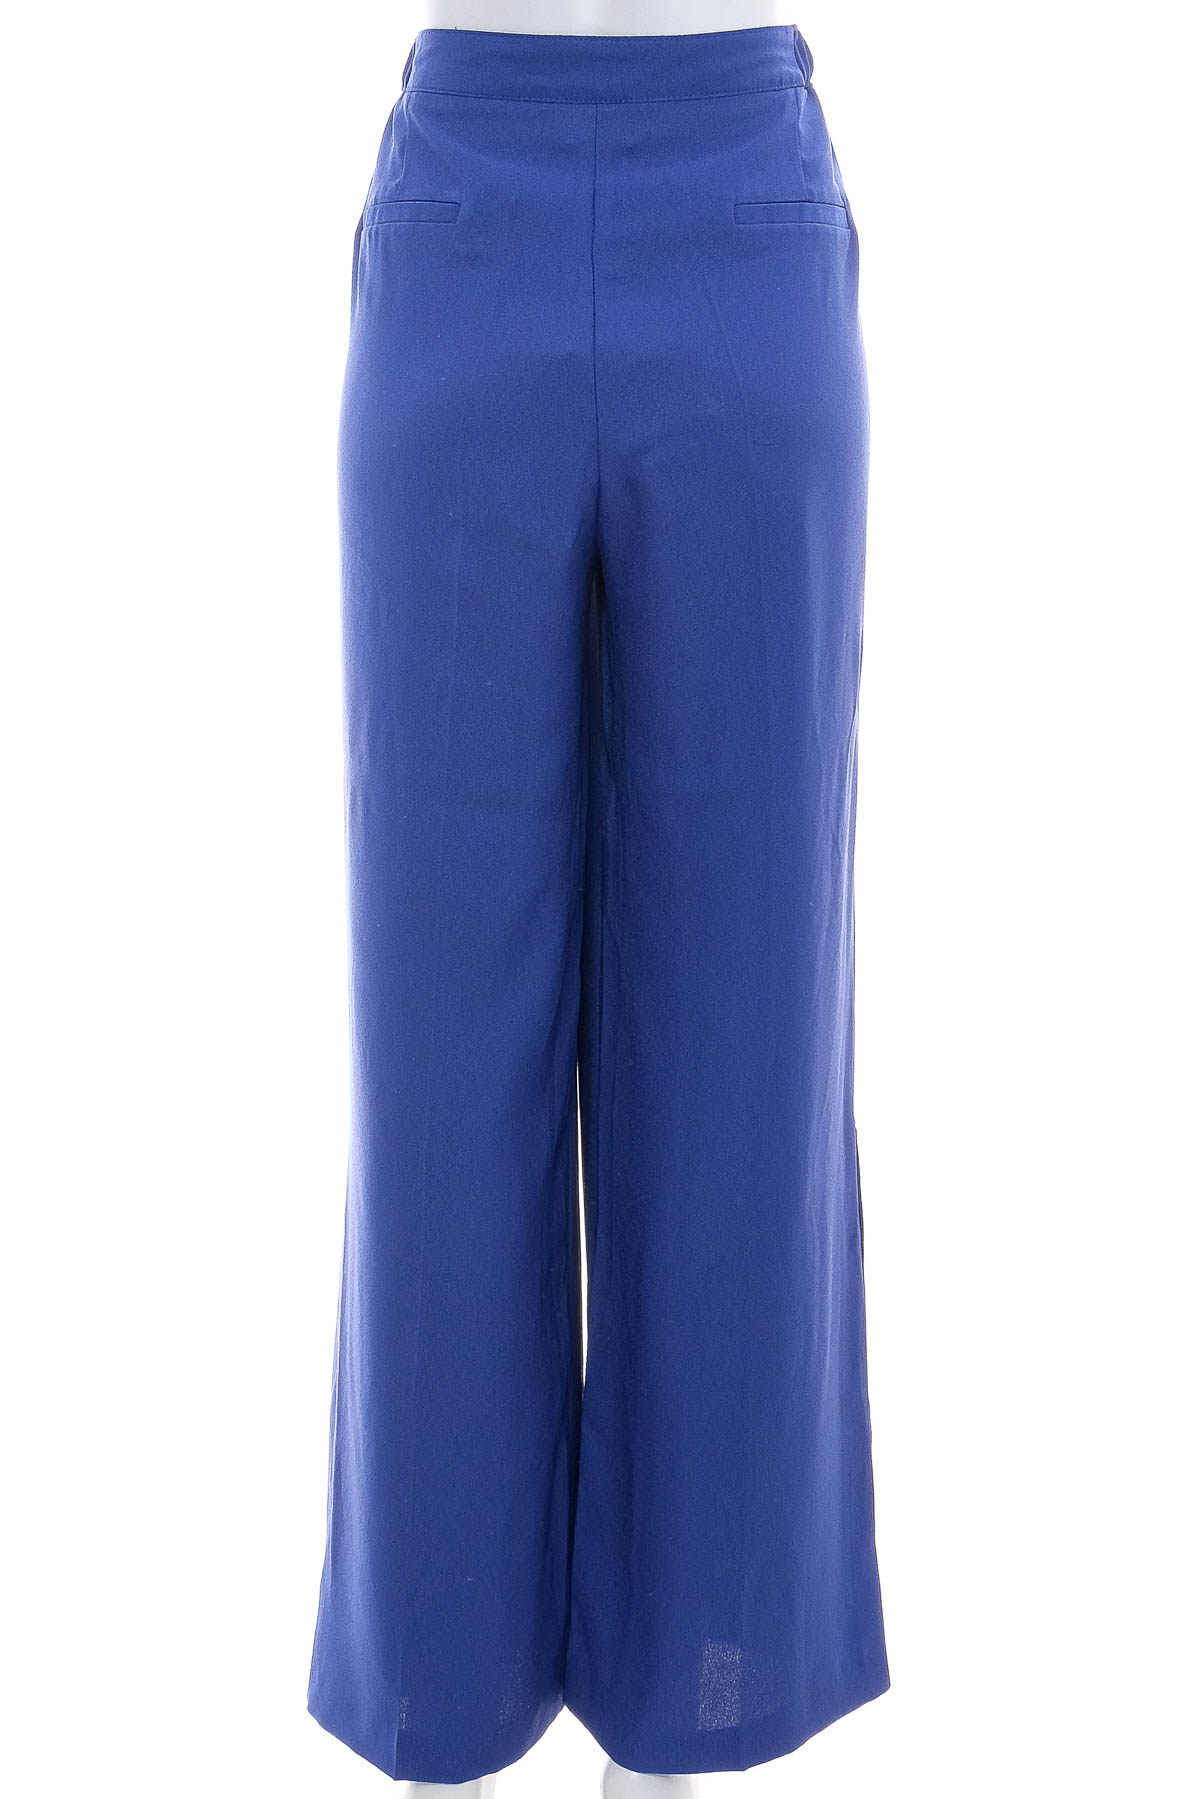 Women's trousers - TAILORED - 1